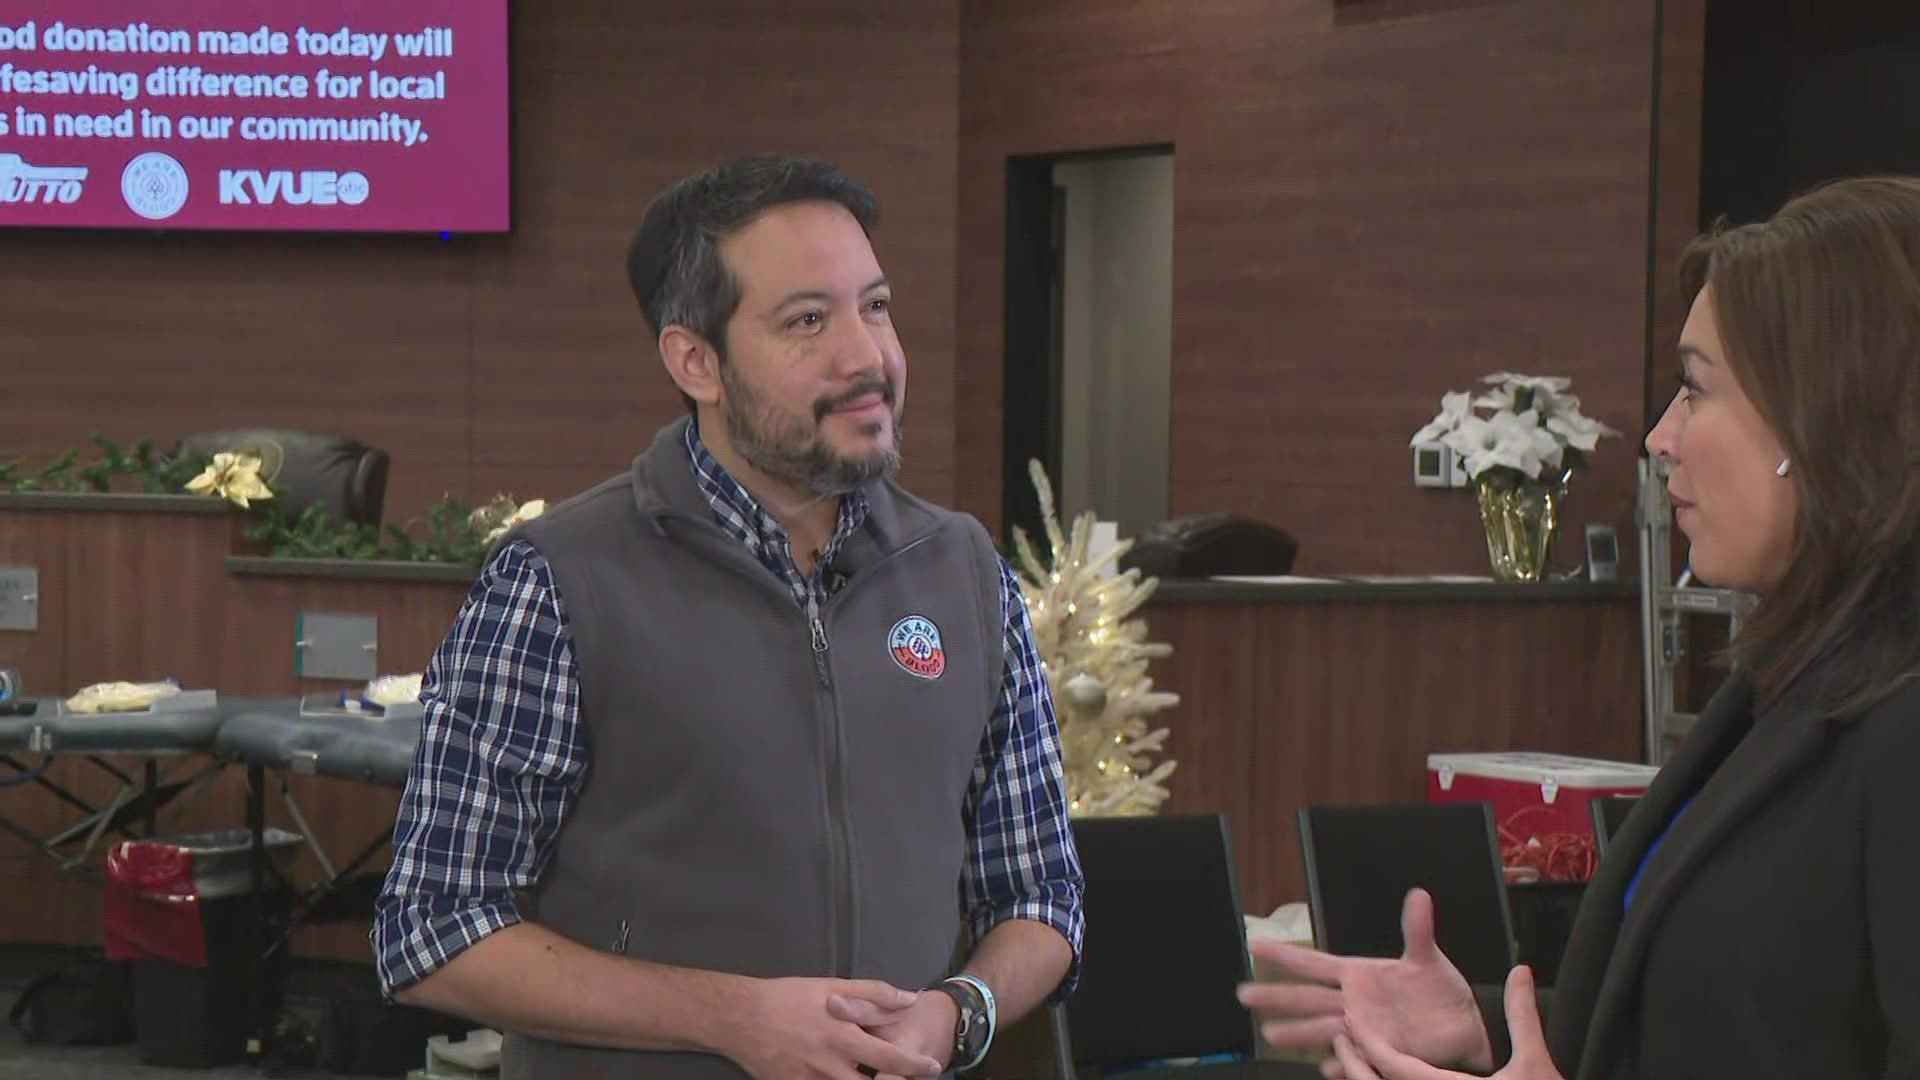 KVUE's Yvonne Nava spoke with We Are Blood Vice President of Community Engagement Nick Canedo on how important donating blood is for the surrounding community